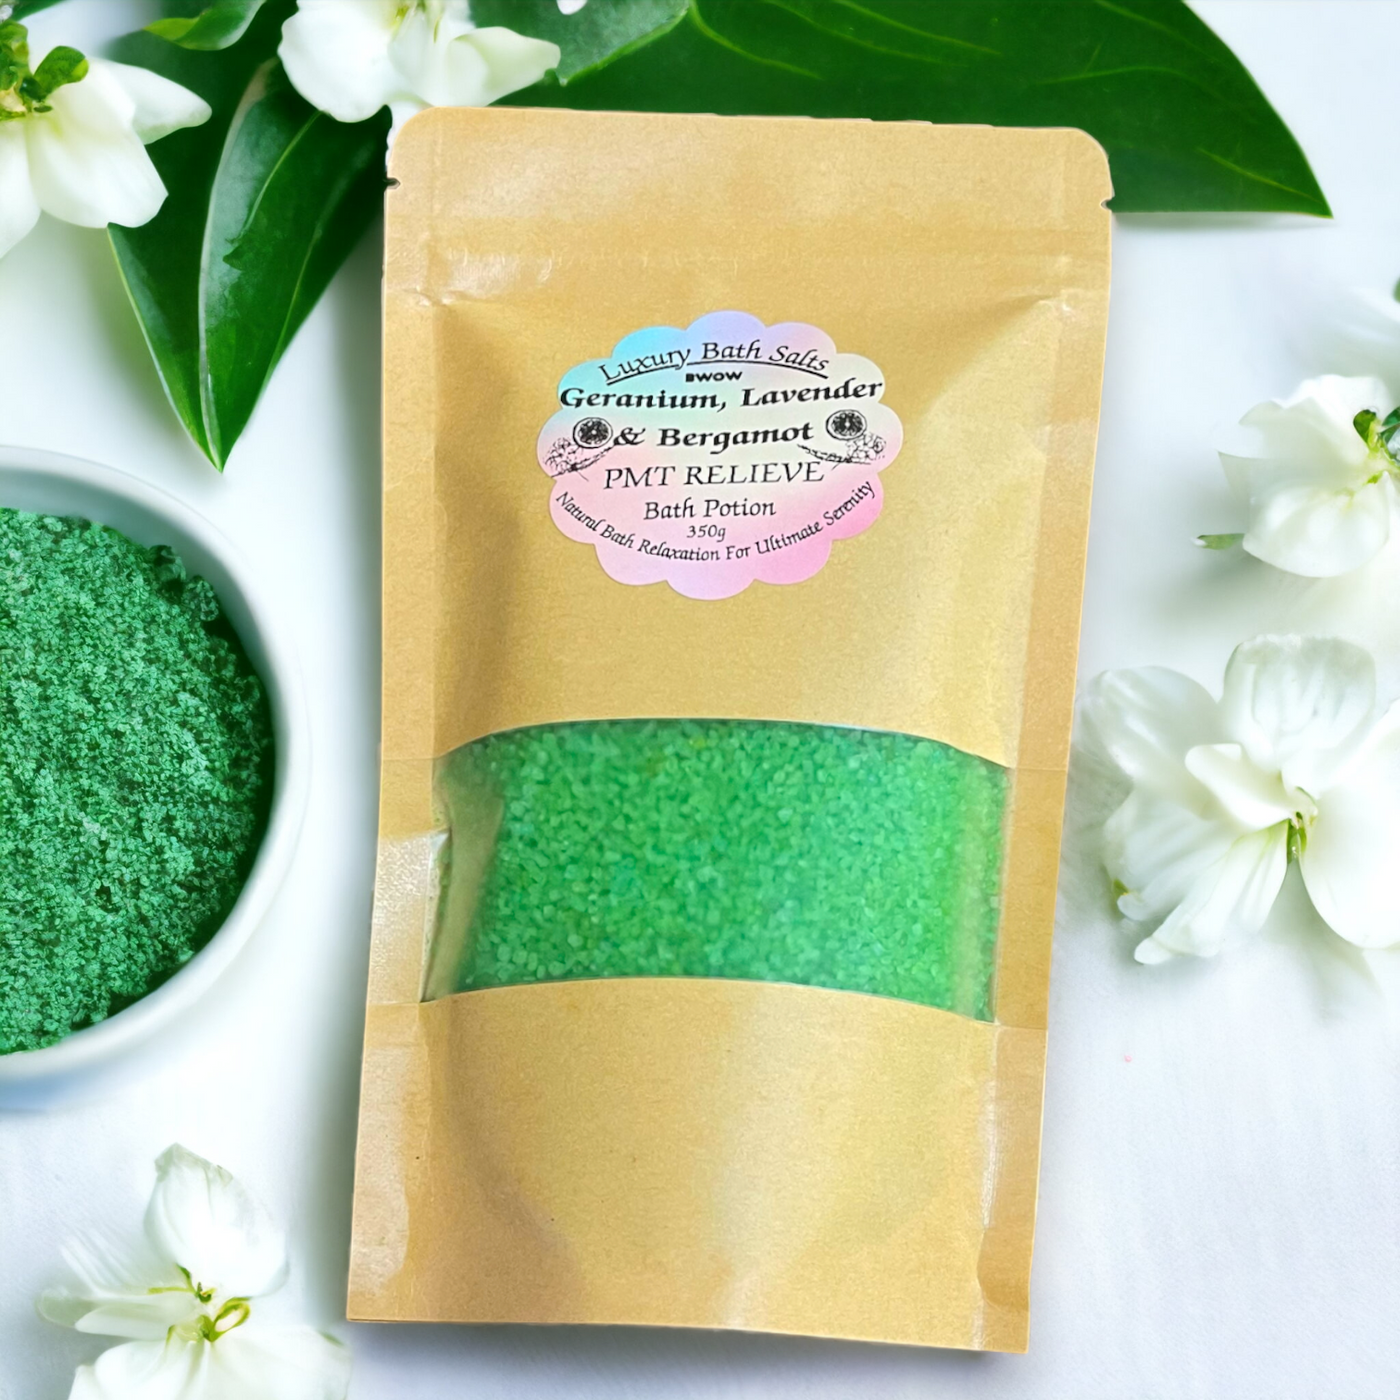 Natural Luxury Bath Salt for PMT Relief: Geranium, Lavender and Bergamot Infused Aromatherapy Potion for a Deep Body Relaxation